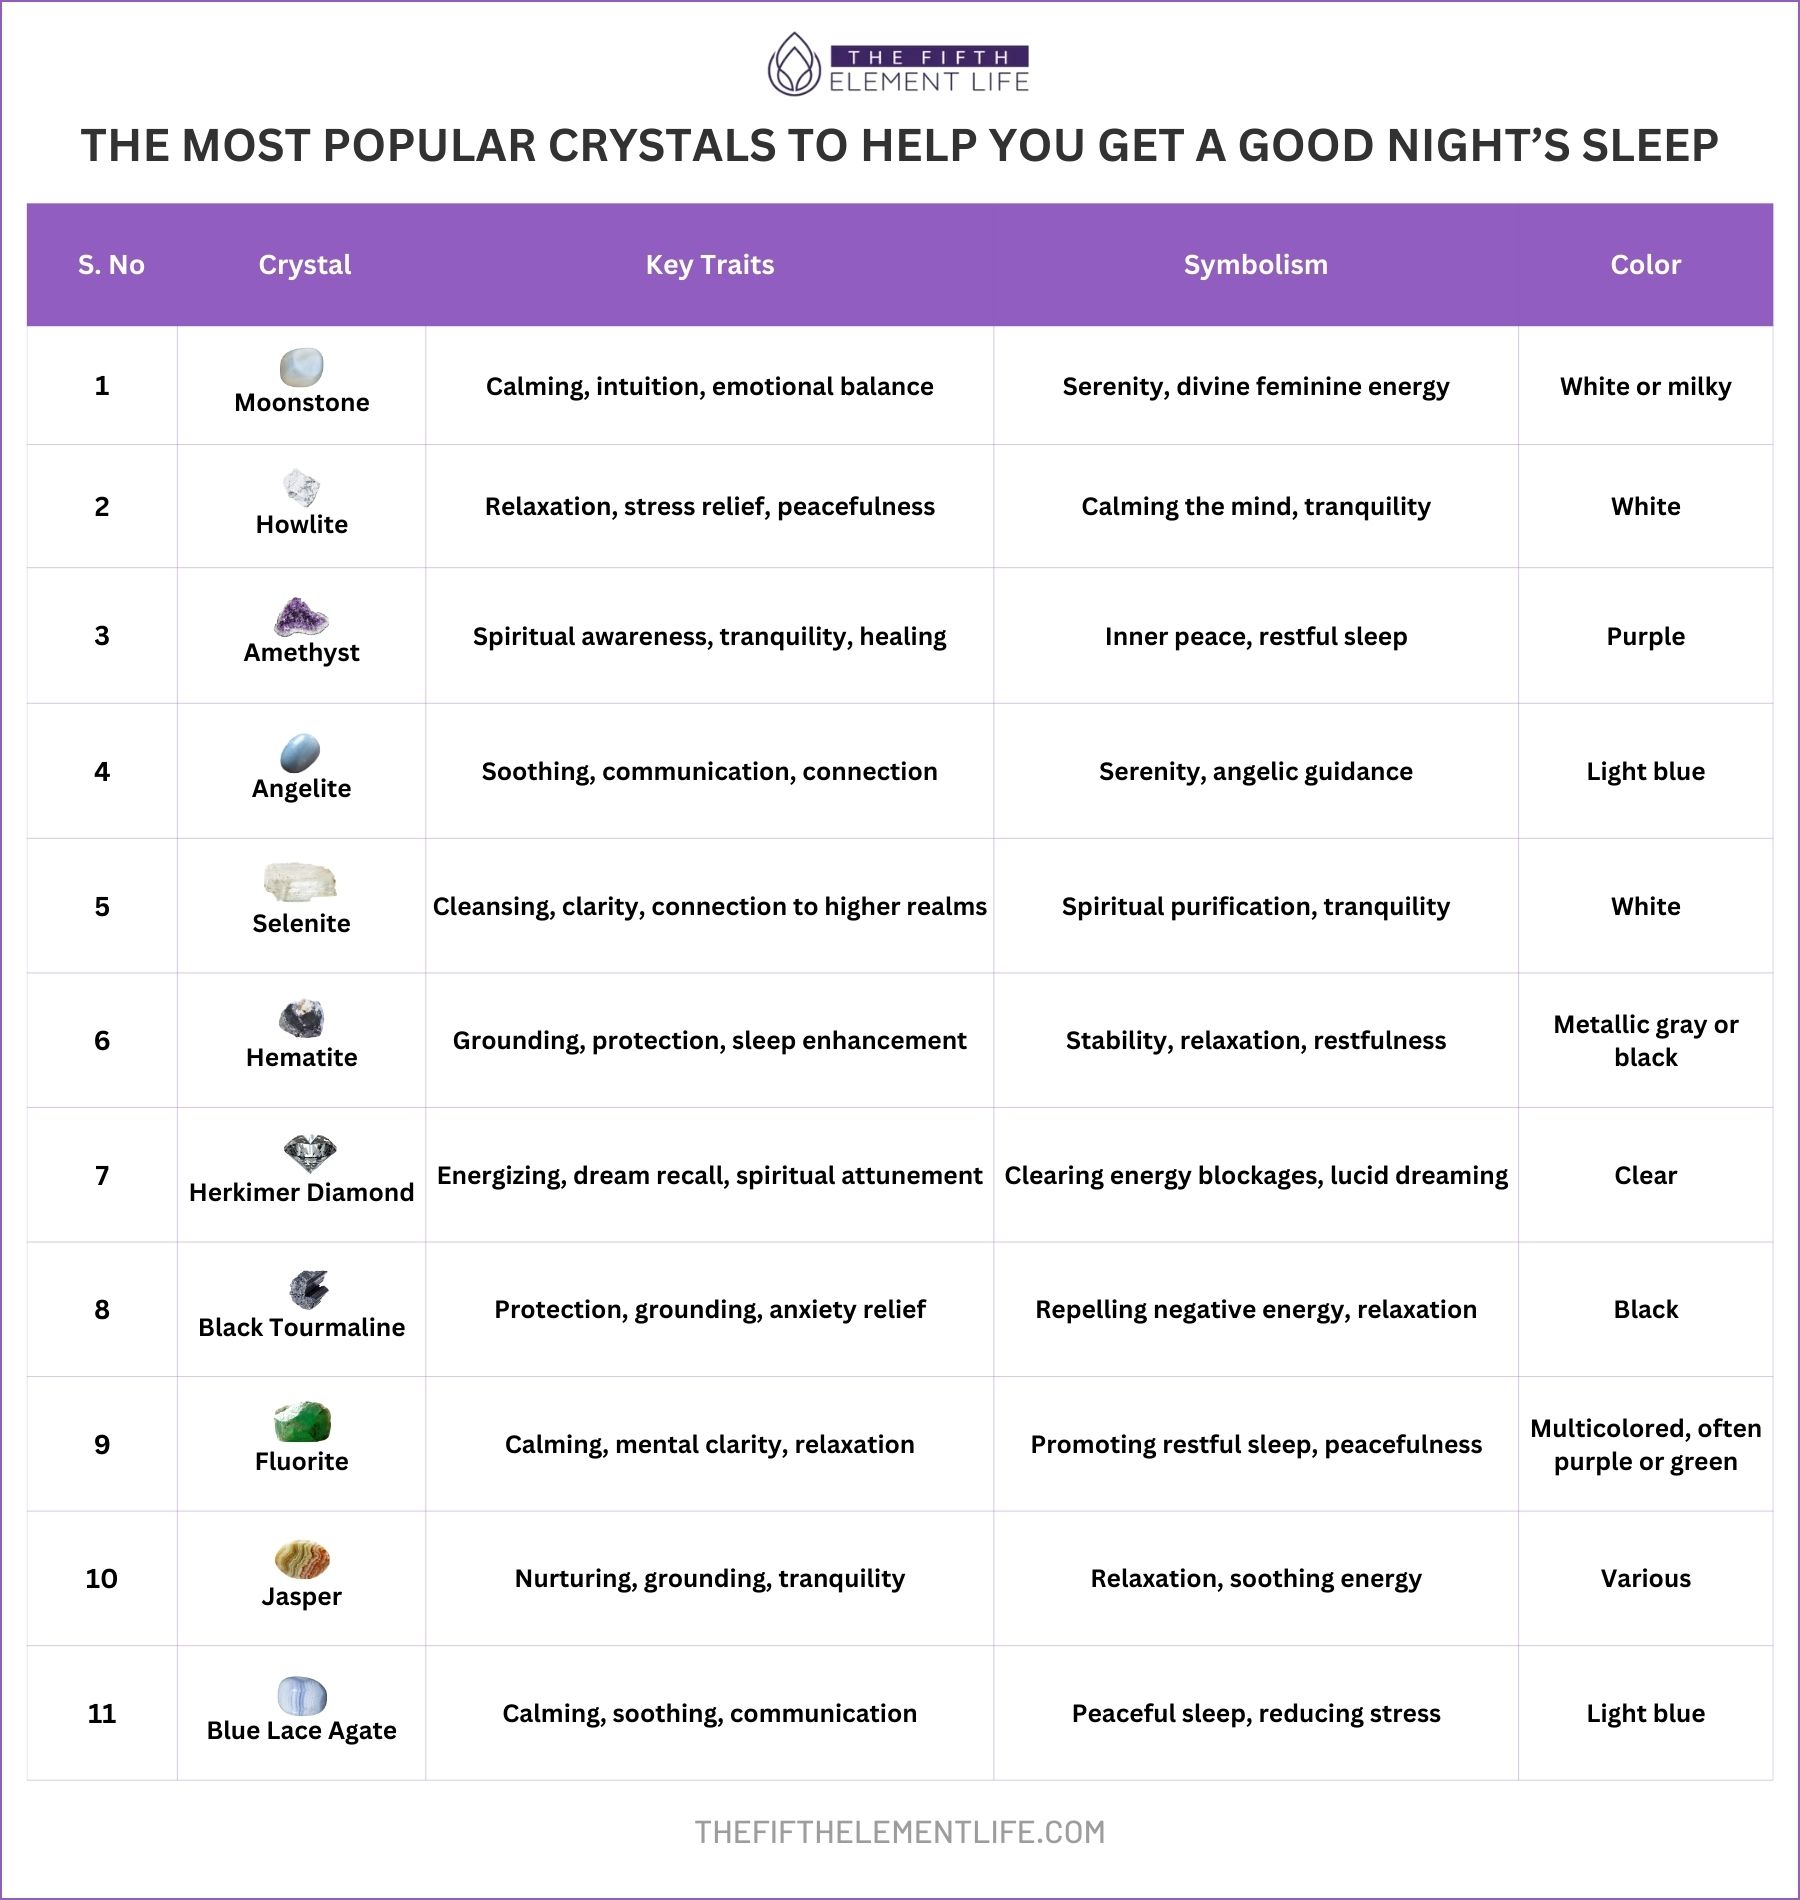 The Most Popular Crystals To Help You Get A Good Night’s Sleep